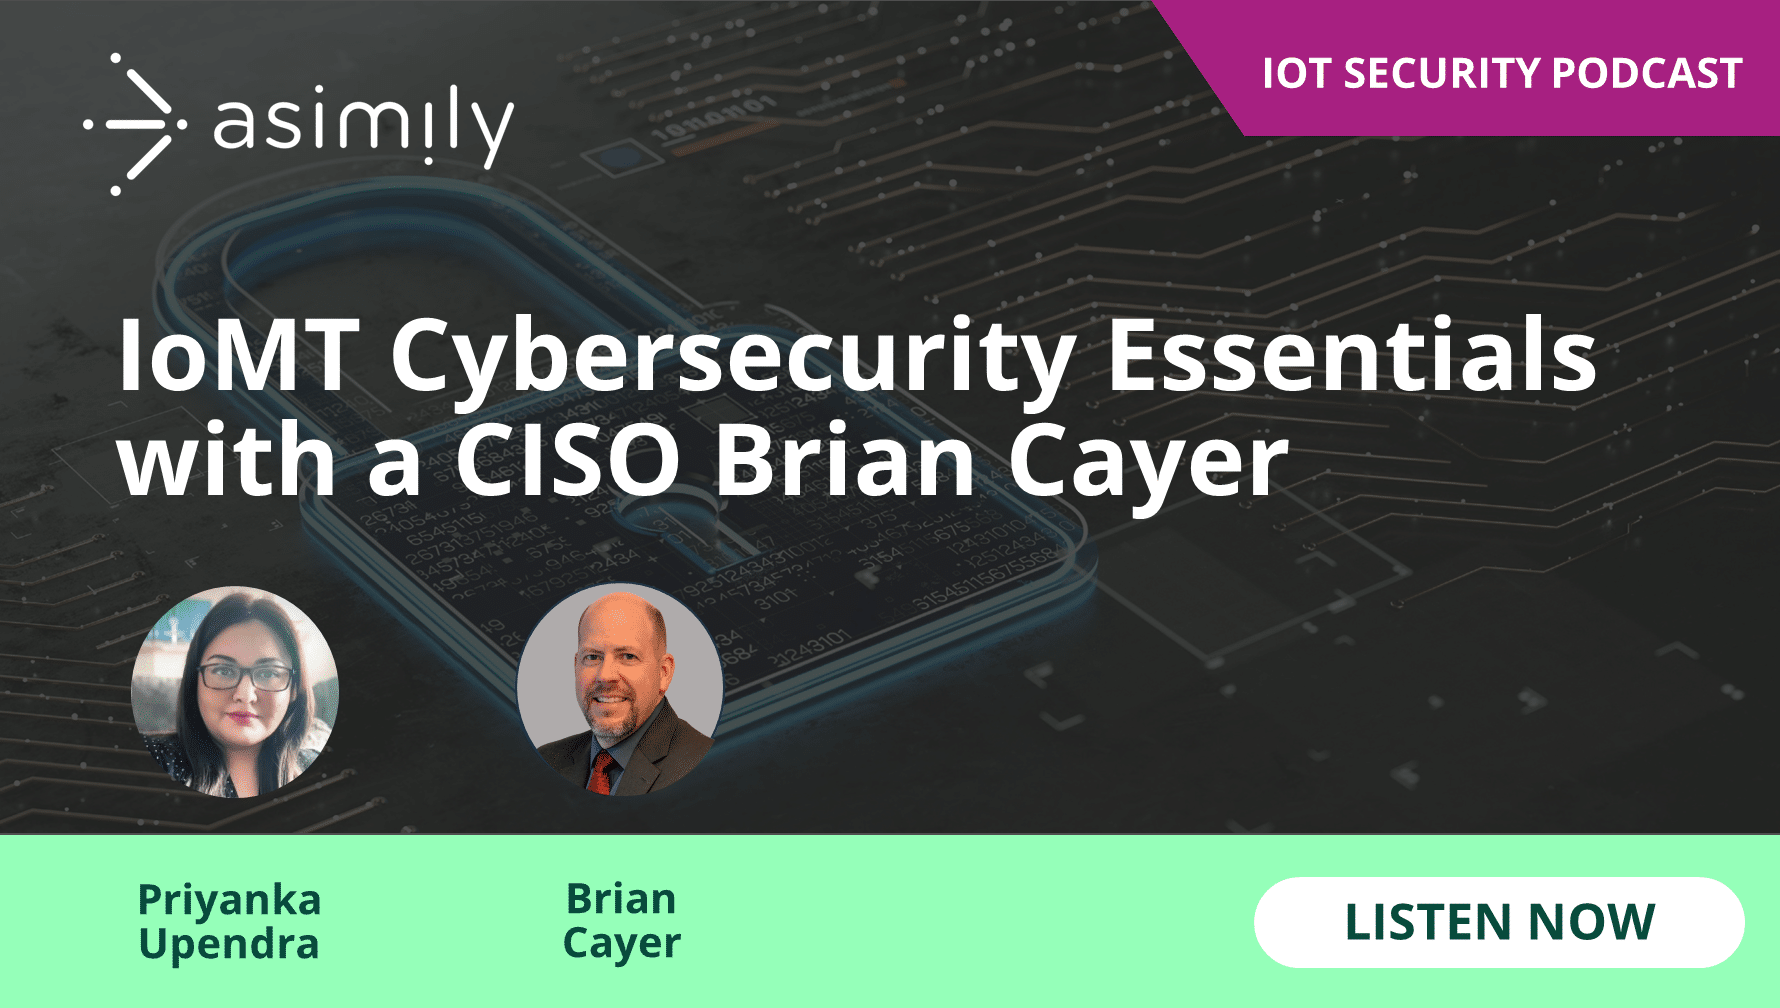 IoMT Cybersecurity Essentials with a CISO Brian Cayer | Asimily